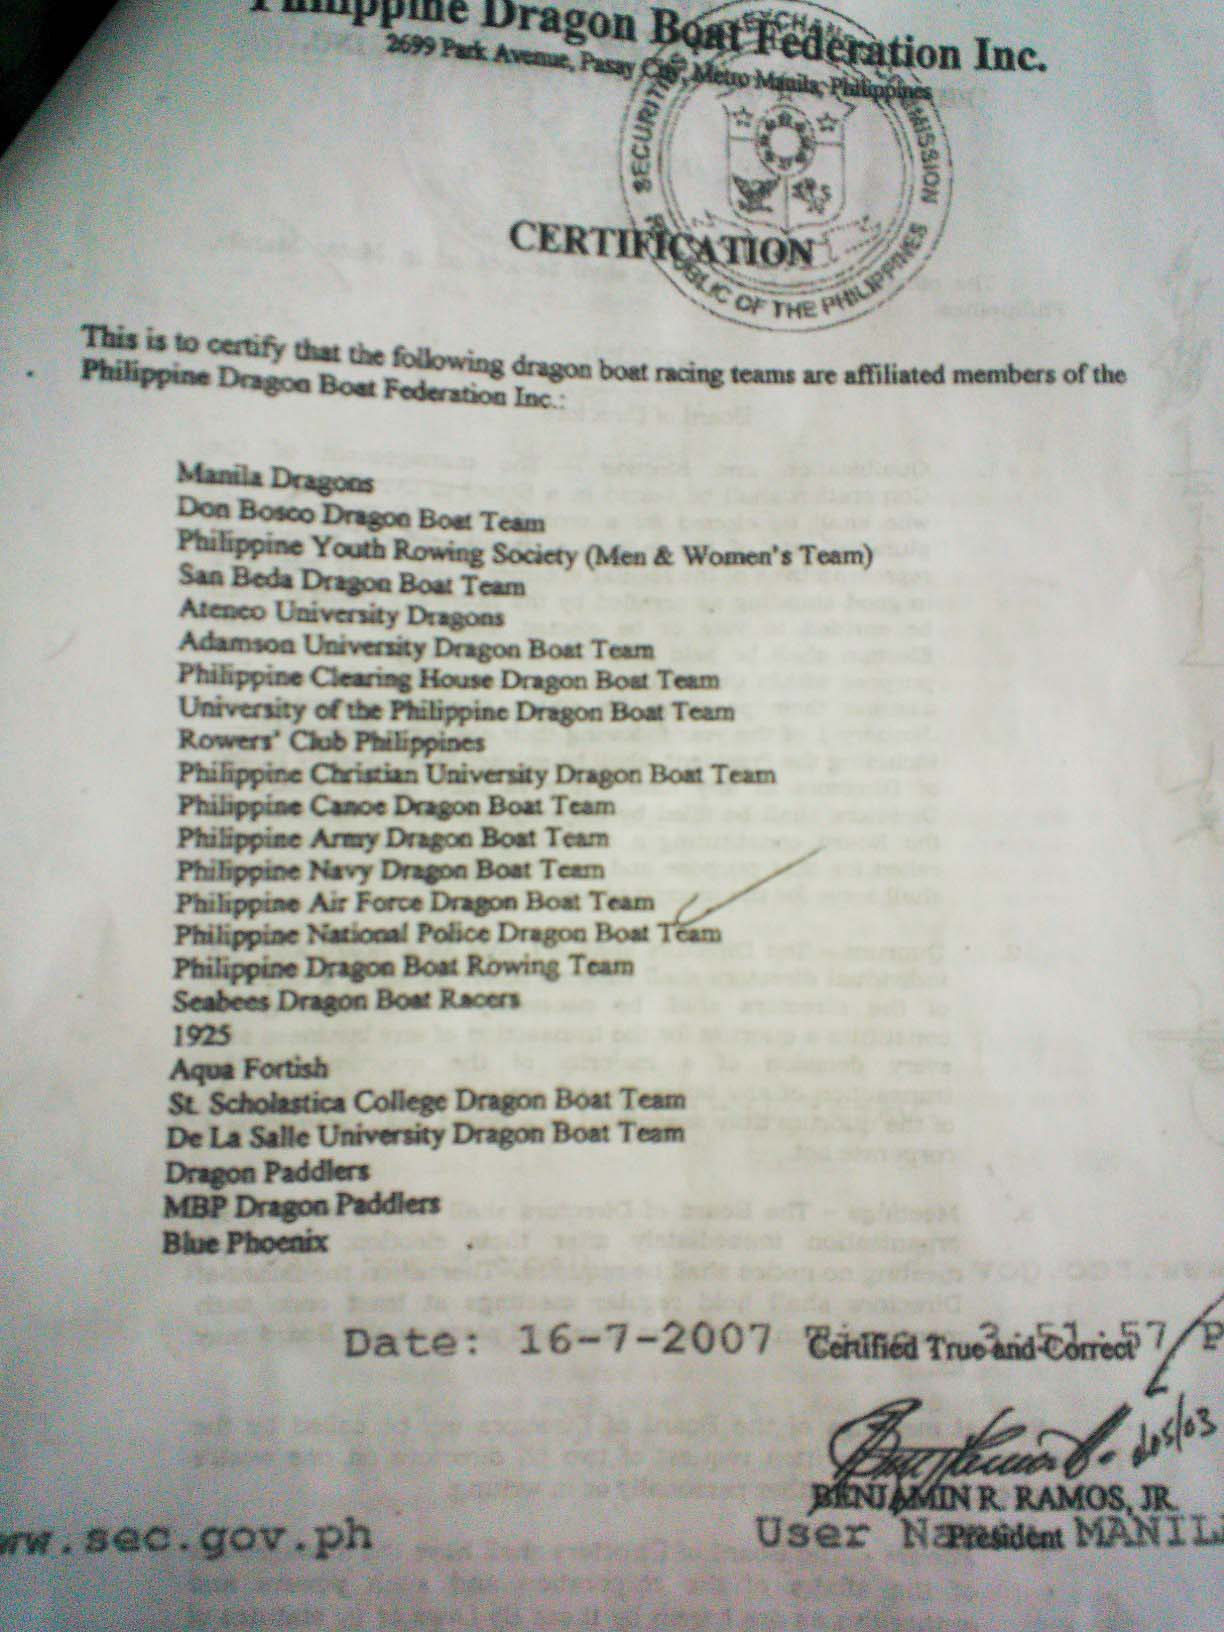 A list of the first club teams upon PDBF’s incorporation, 2003